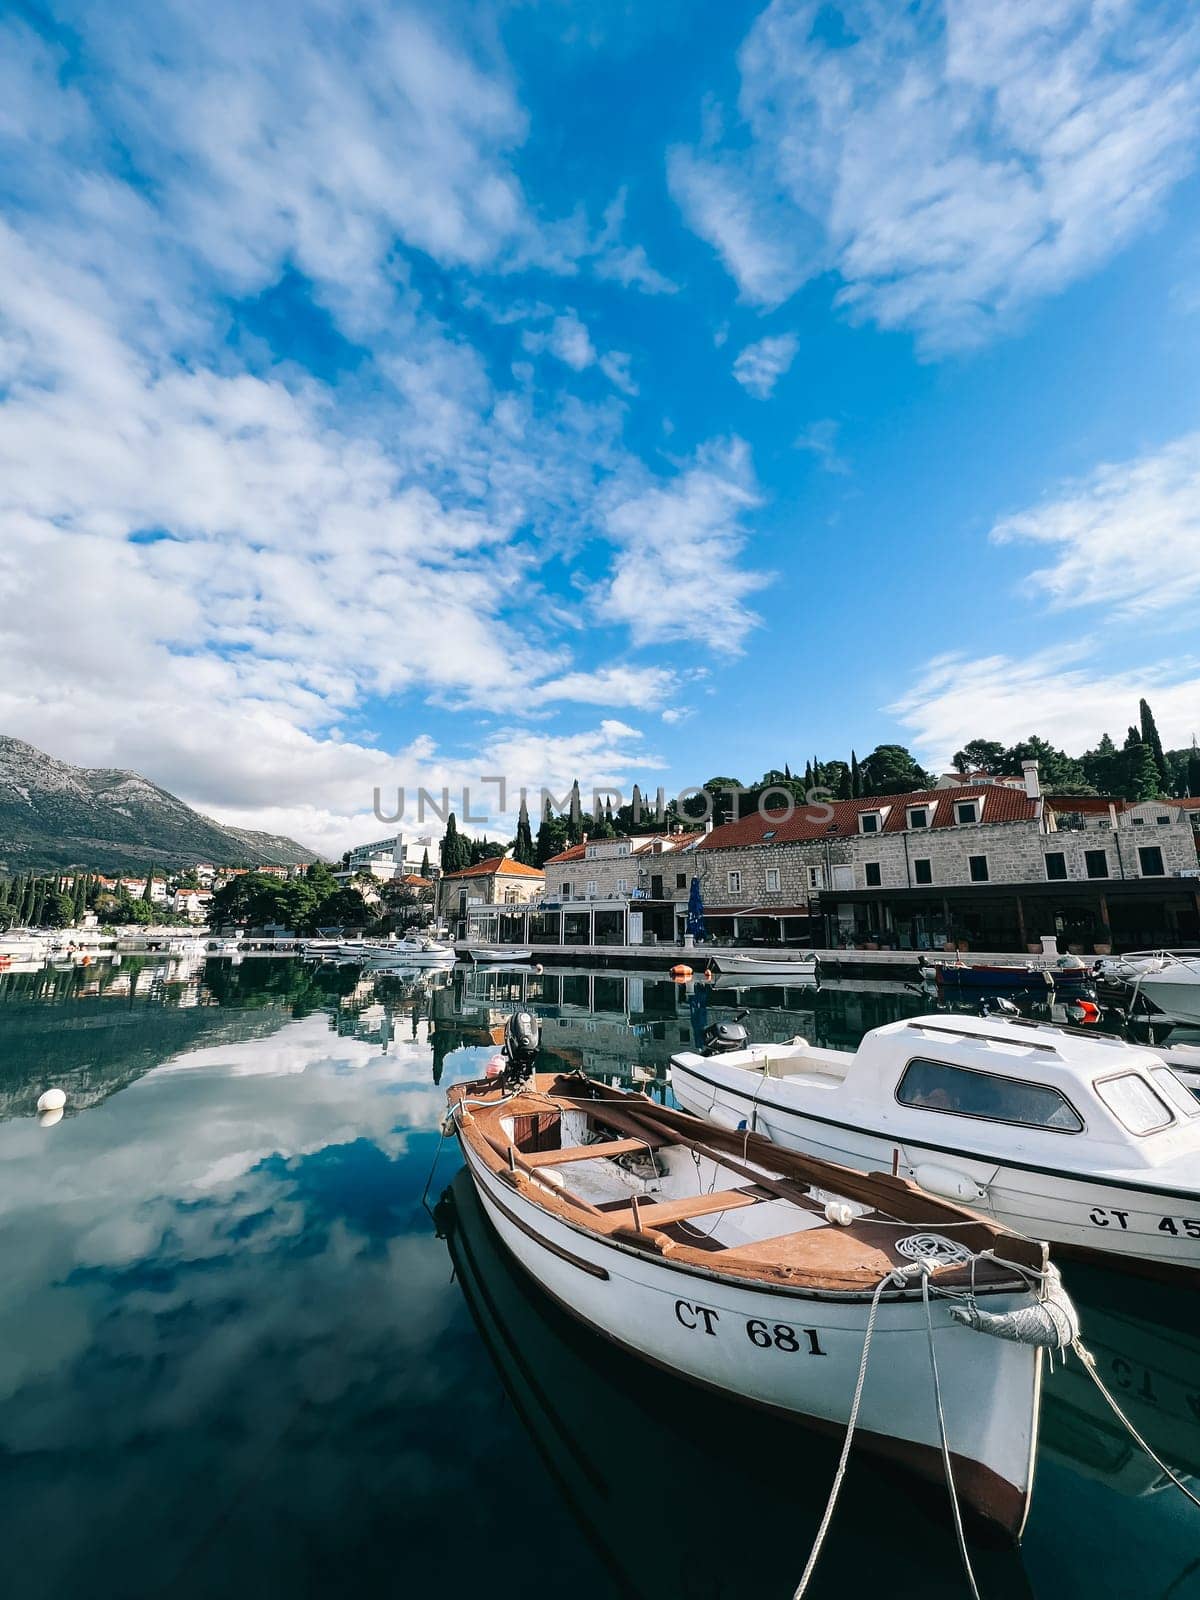 Boats are moored at the waterfront of the resort town at the foot of the mountains. High quality photo